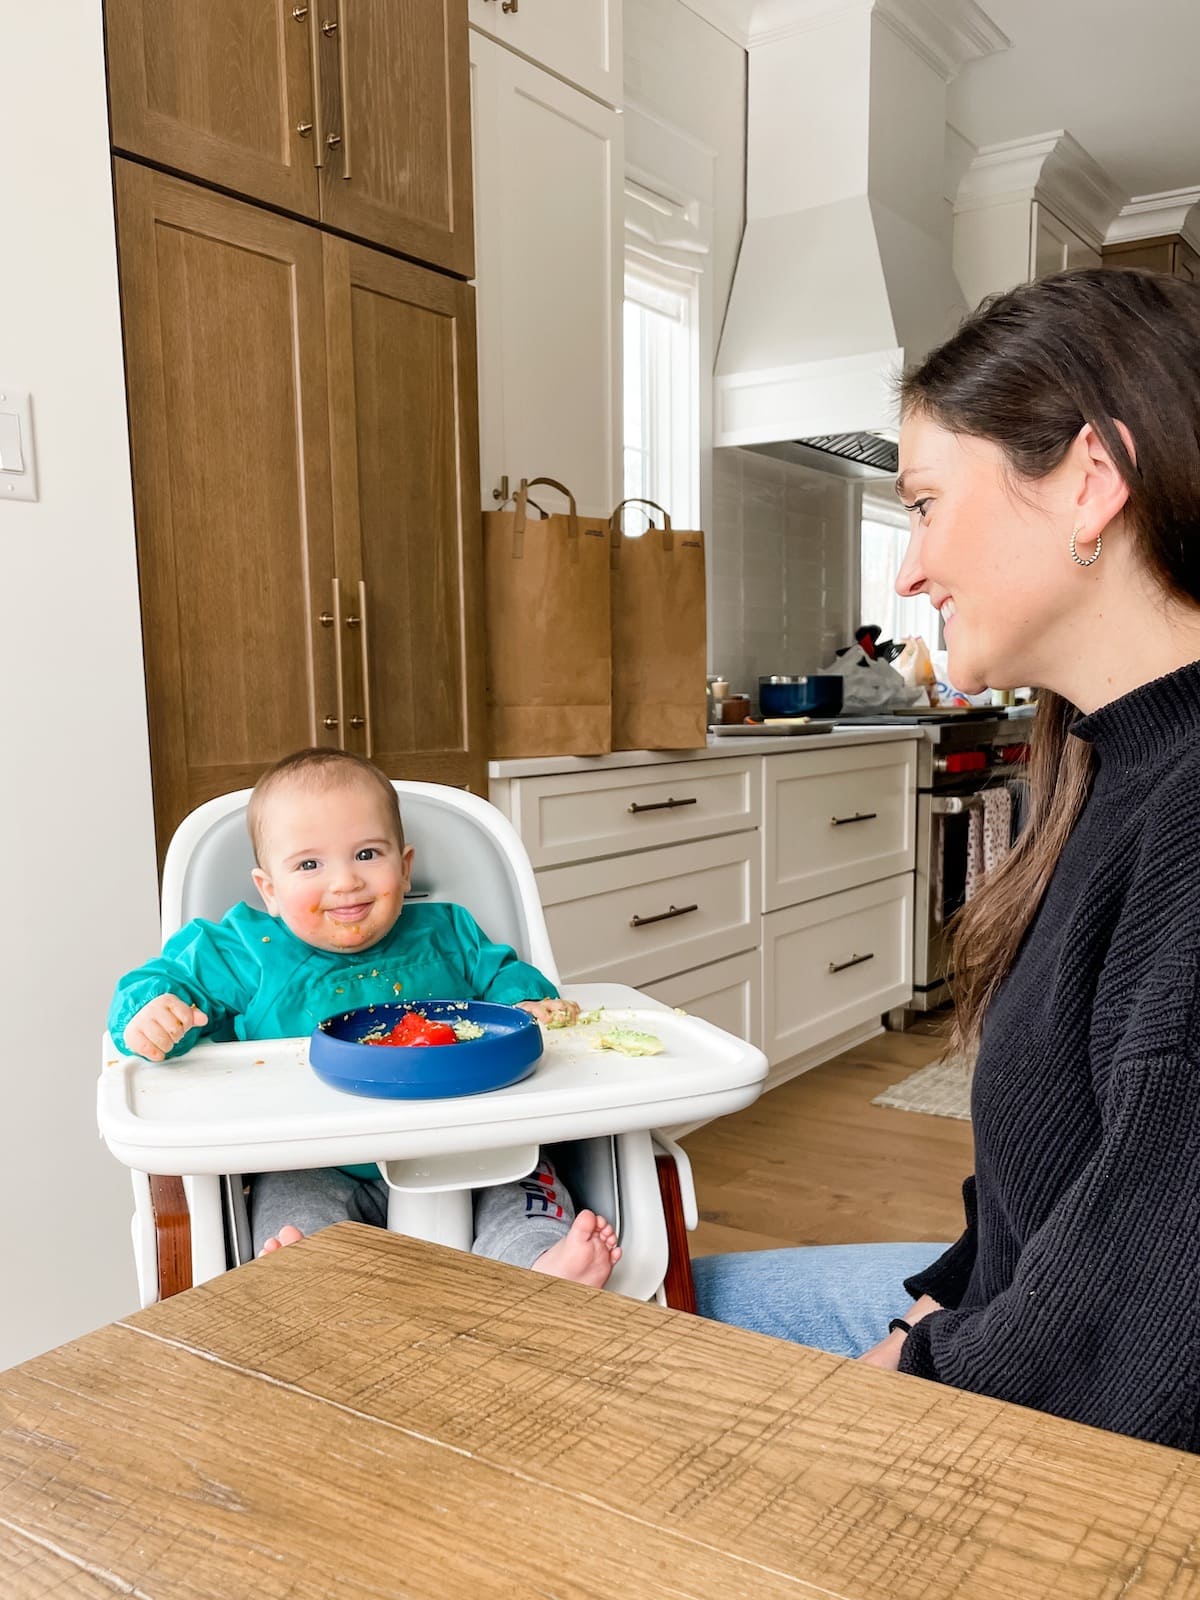 6 month old baby in high chair with blue plate, mom on the side in a black sweater.